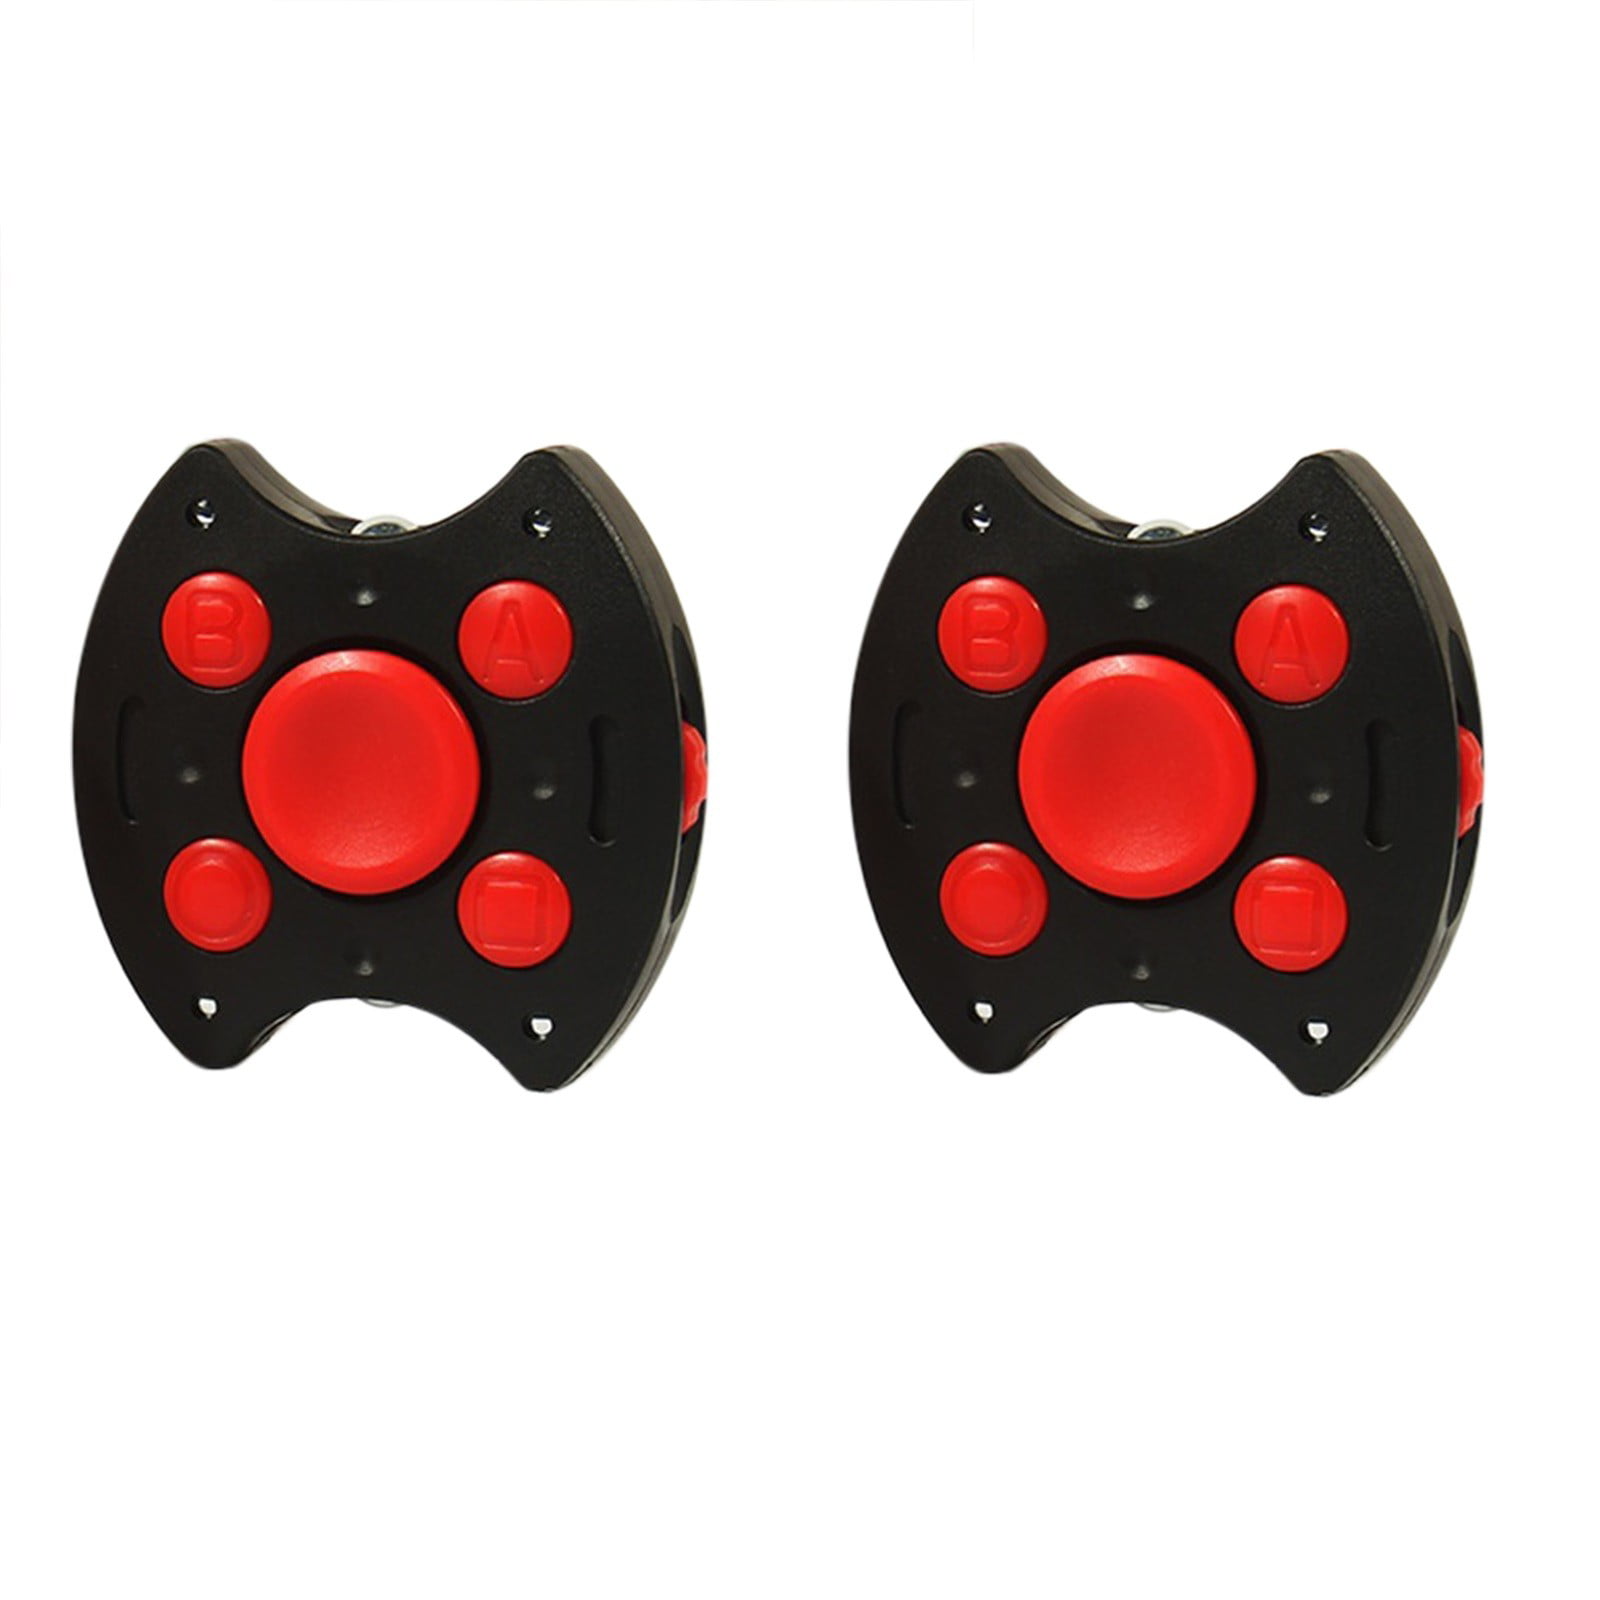 Details about   Fidget Cube Pad Controller Game Toys ADHD Kids Relieve Anxiety Depression Stress